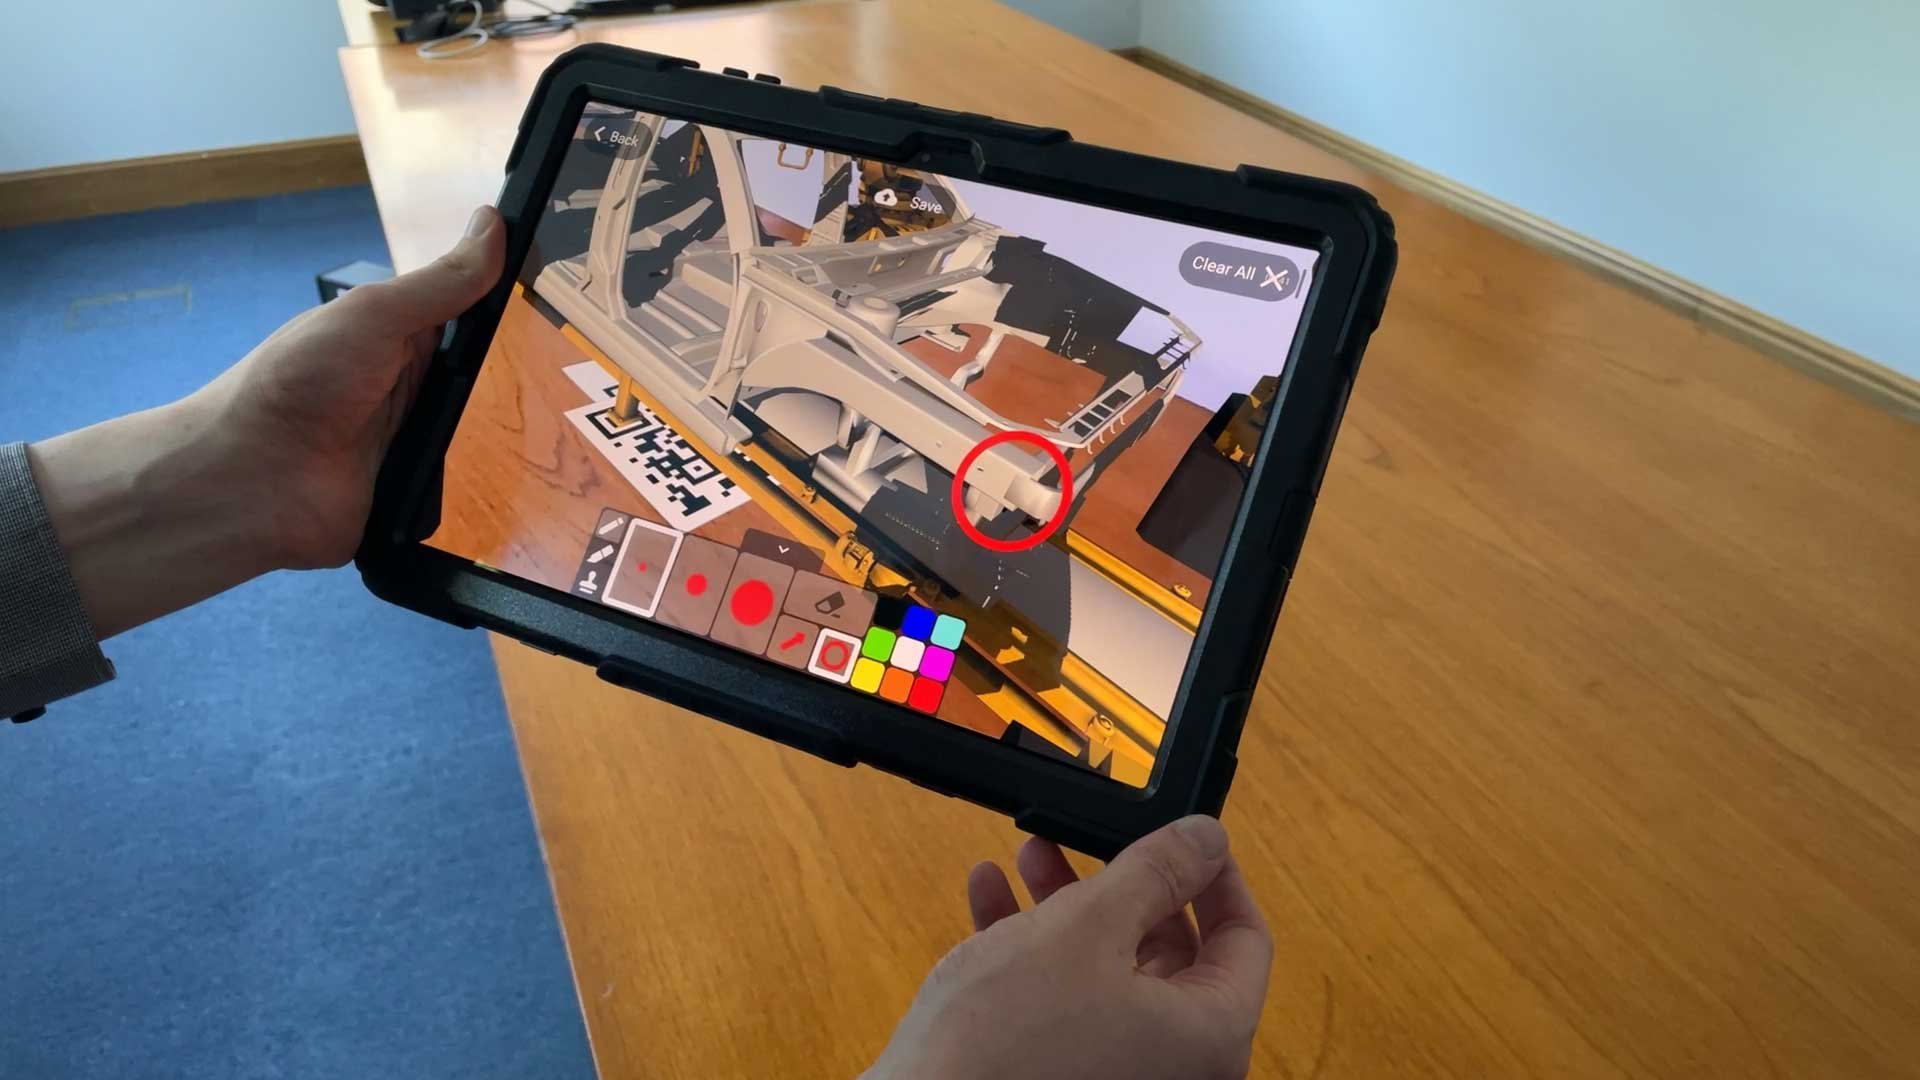 A picture of the markup tool being used in the Theorem-AR app on the Samsung Galaxy Tab S7.